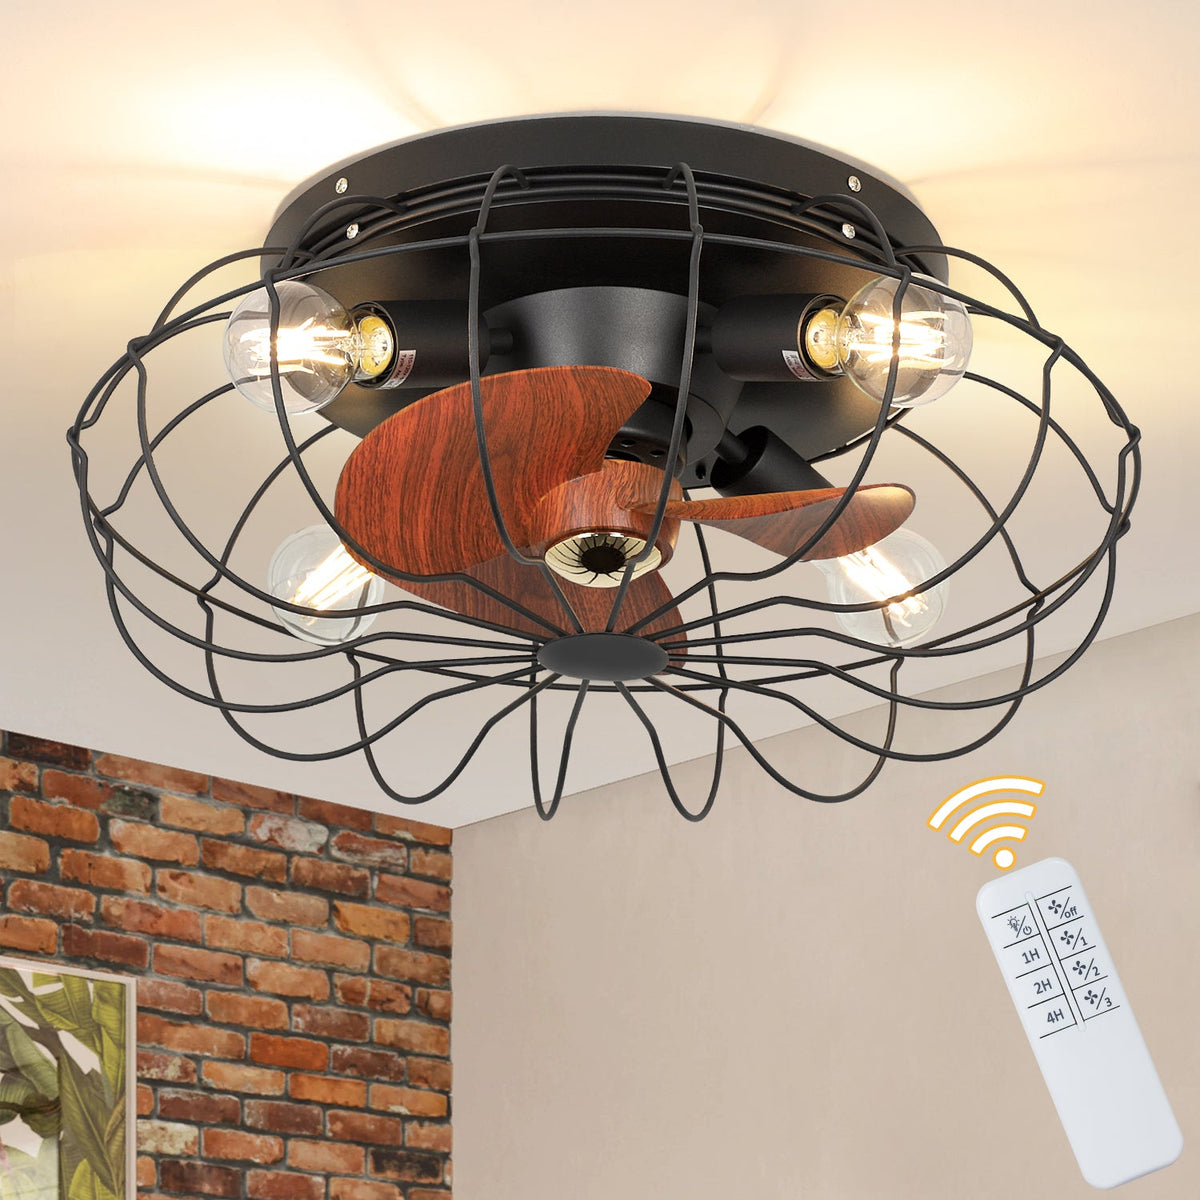 Depuley Caged Design Wooden Thickened Blades Ceiling Fan Lights with Remote, 19.7'' Semi-Enclosed Low Profile Ceiling Fan with 3-Level Wind Speed, Frosted Black Flush Mount Ceiling Fan for kitchen/Bedroom/Living Room/Farmhouse - WS-FPZ28-60B 1 | Depuley